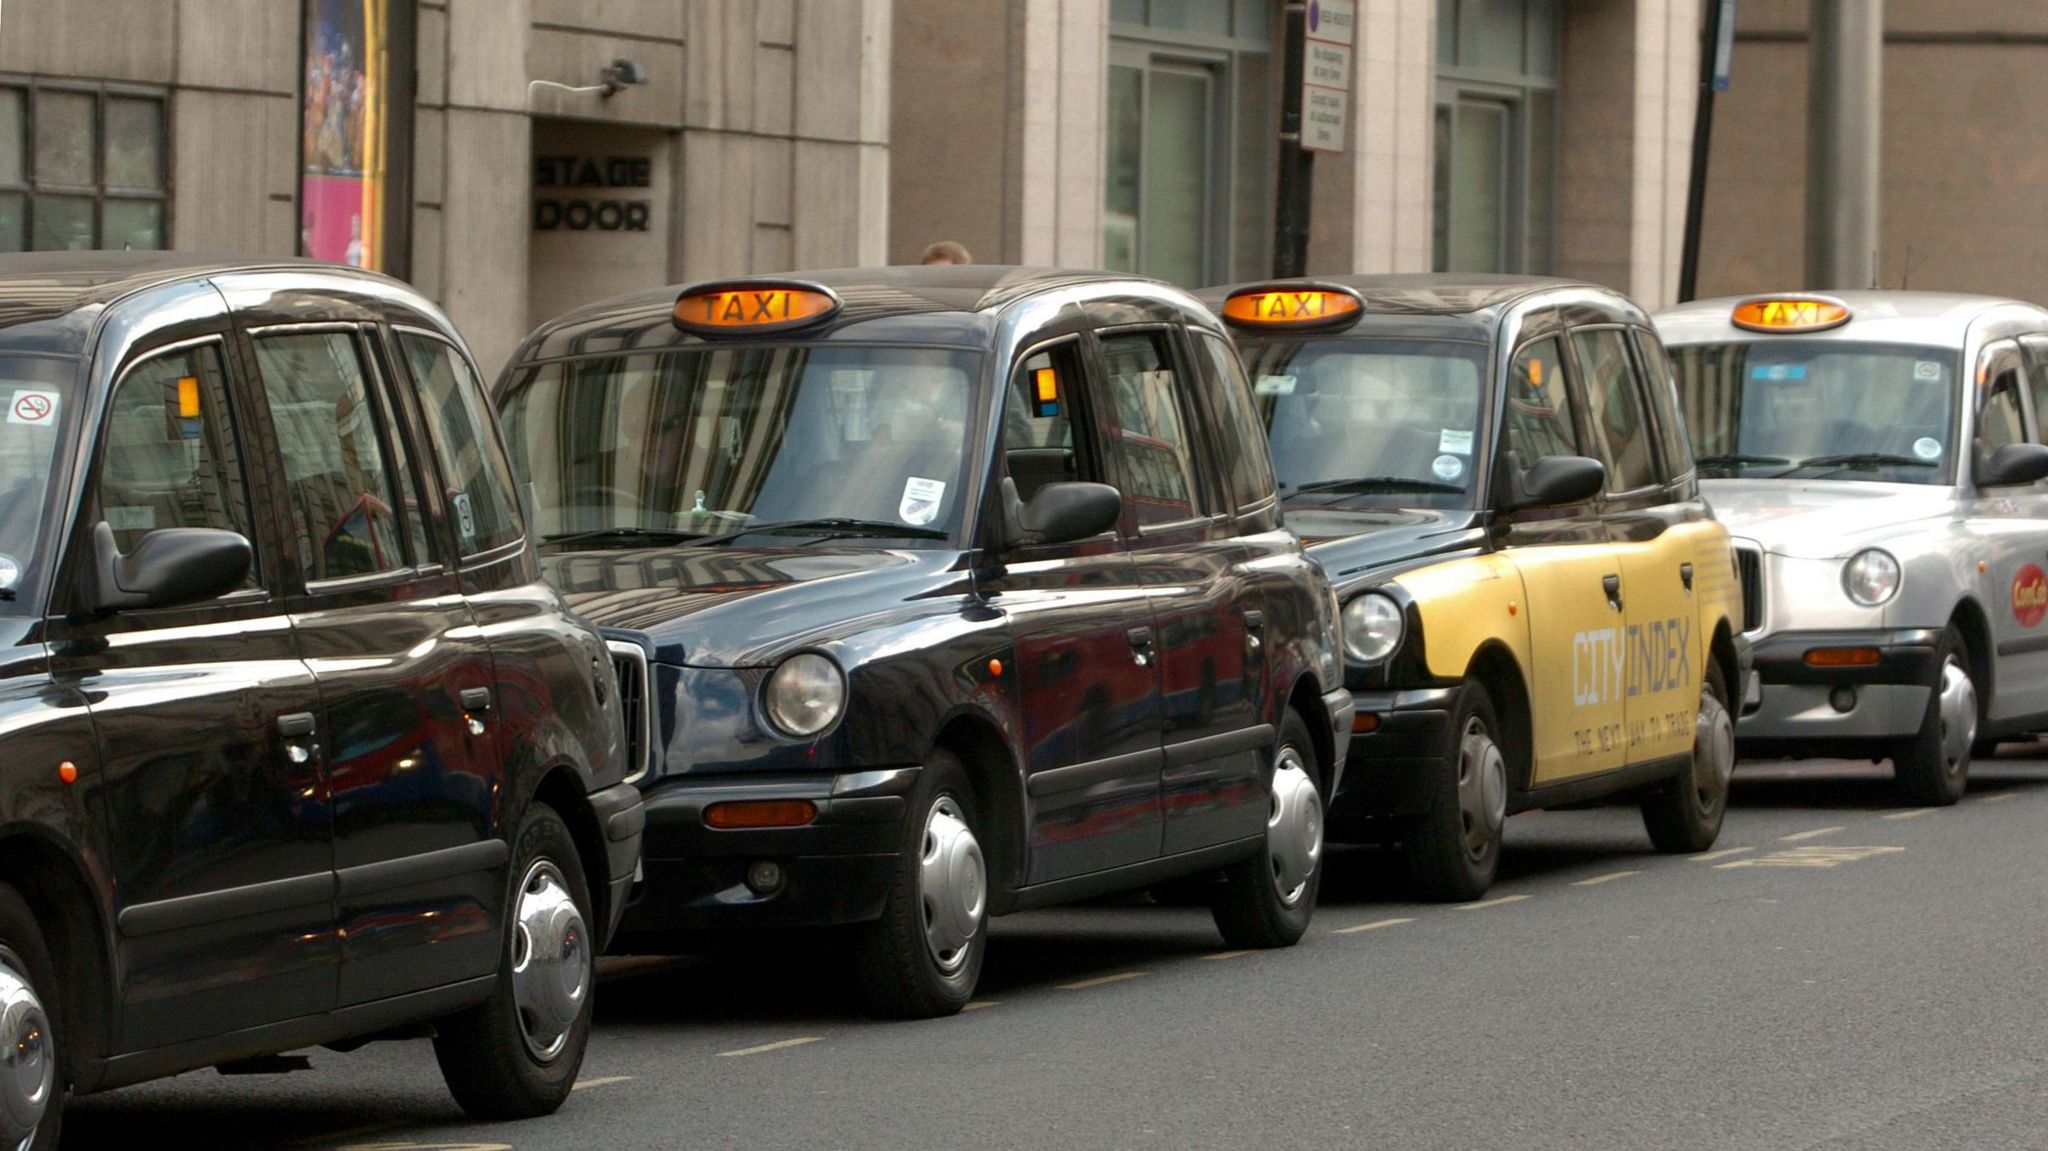 Hackney carriages or London taxis ("Black Cabs") wait on a cab rank at Victoria Station 